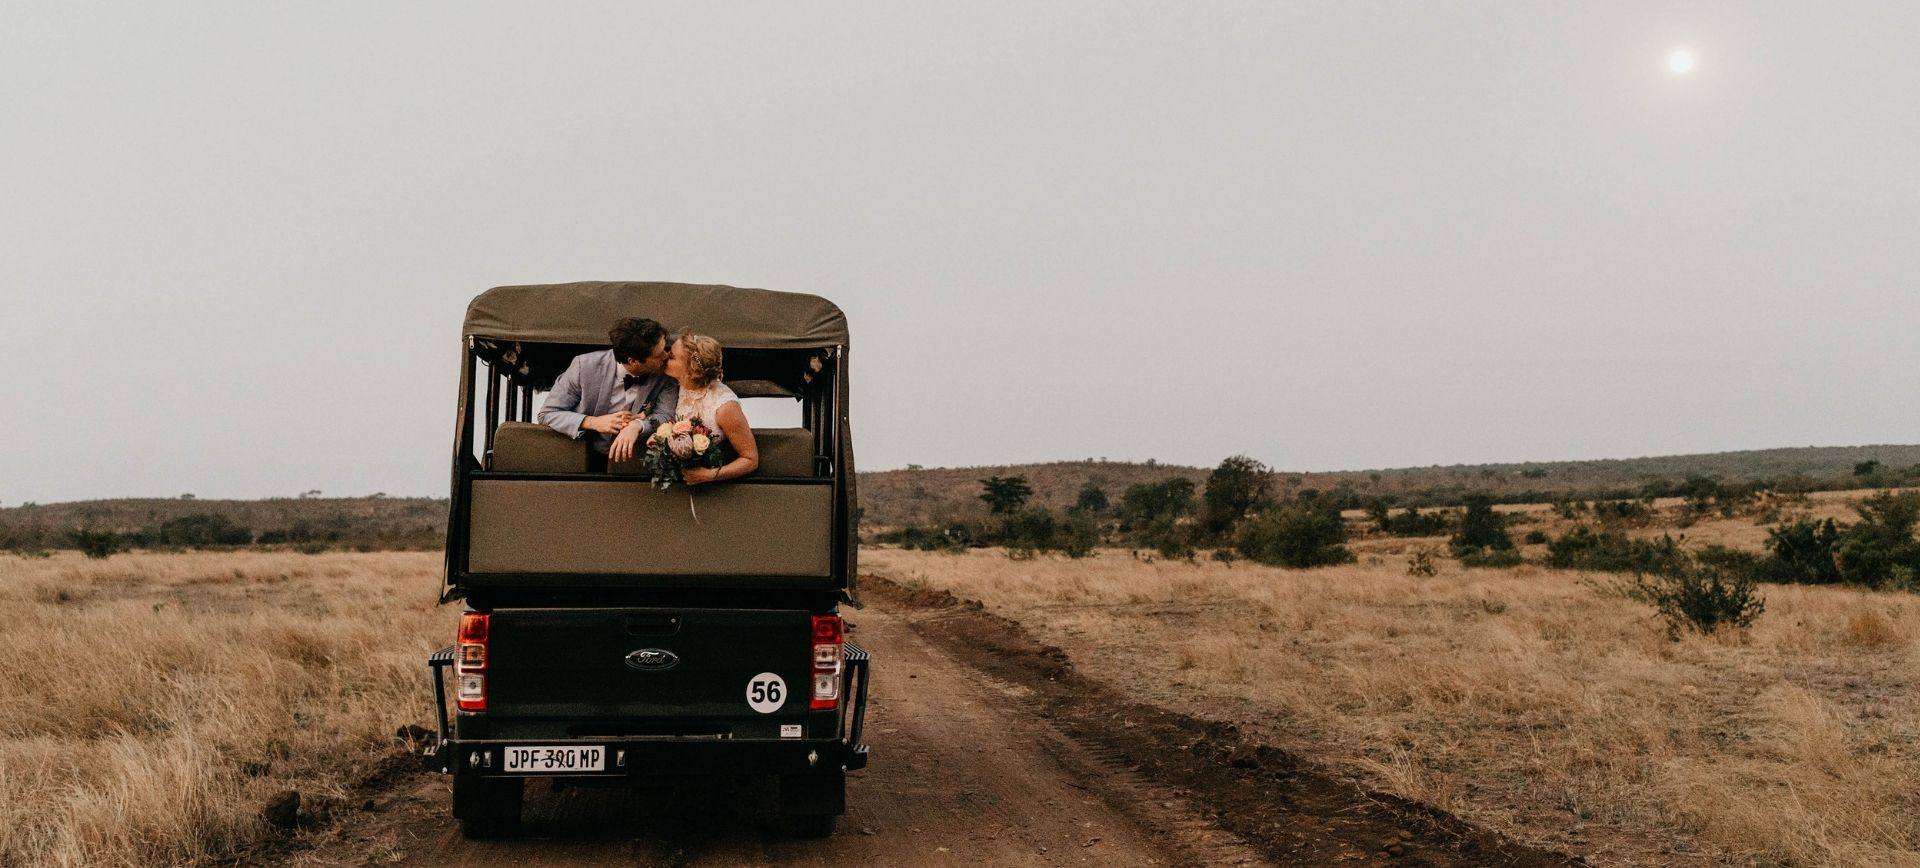 south africa safari elopement wedding package - adventure wedding with jeep